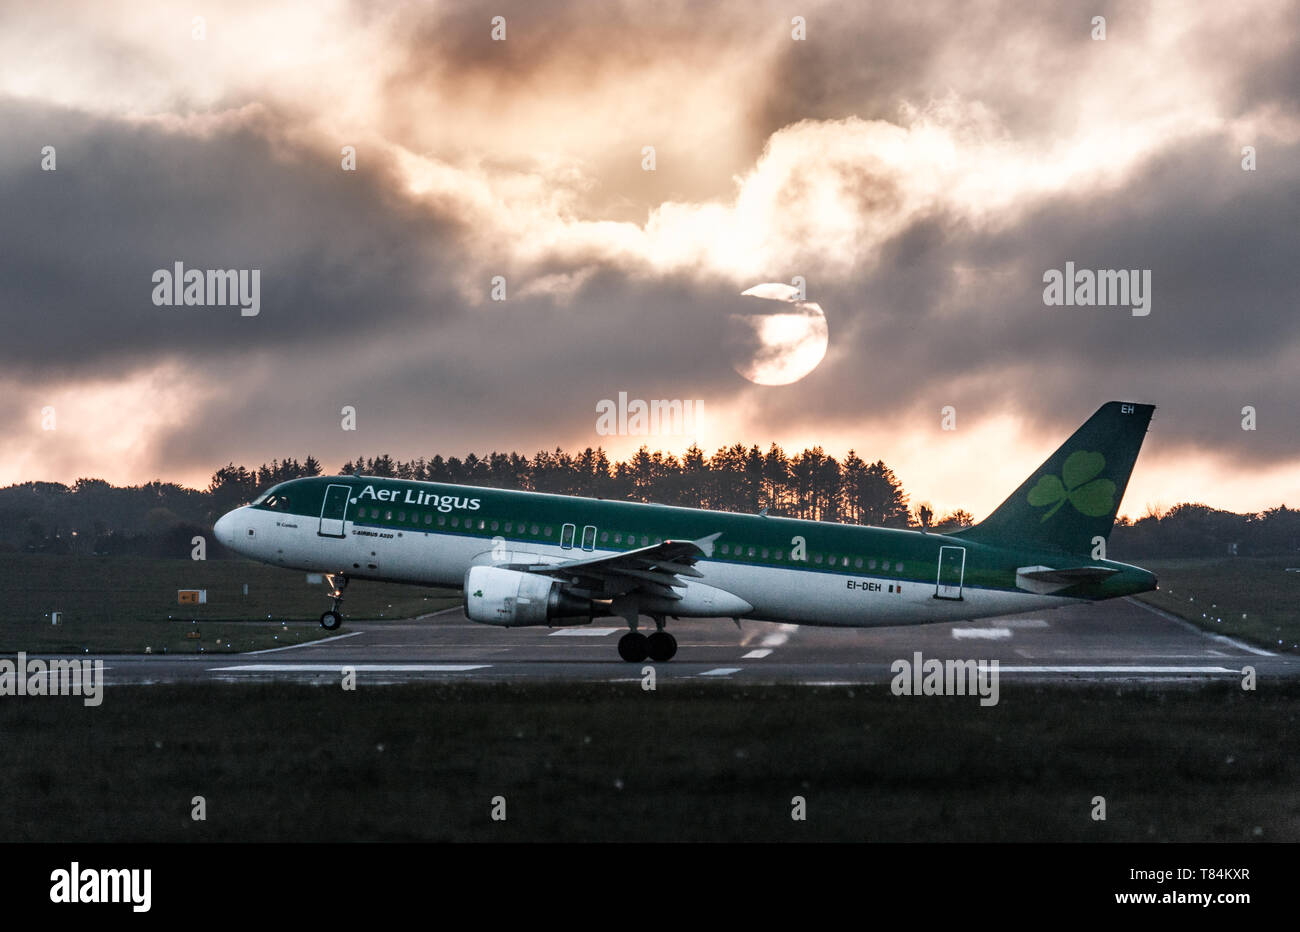 Cork Airport, Cork, Ireland. 11th May, 2019. Aer Lingus Airbus A320 takes off for Lanzarote just after sunrise from Cork Airport, Cork, Ireland. Credit: David Creedon/Alamy Live News Stock Photo